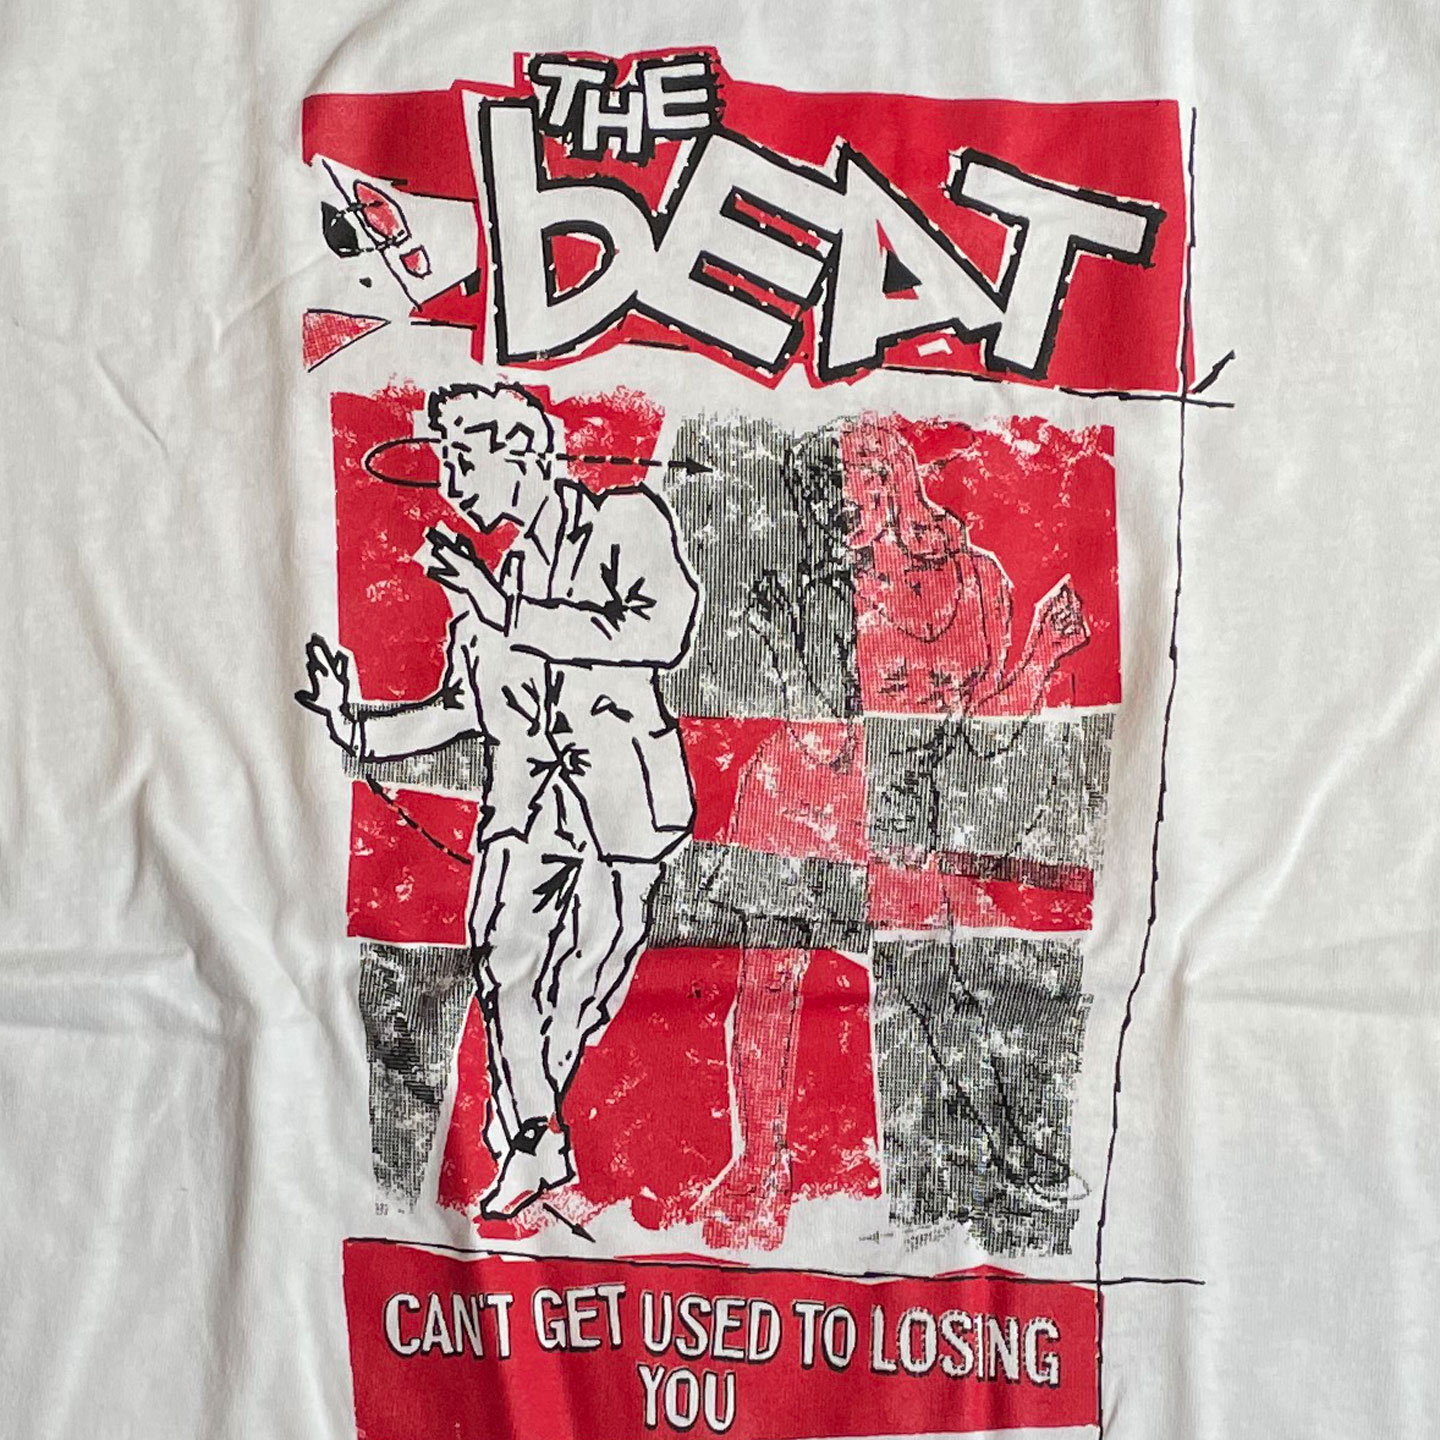 THE BEAT(ENGLISH BEAT) Tシャツ Can't Get Used to Losing You